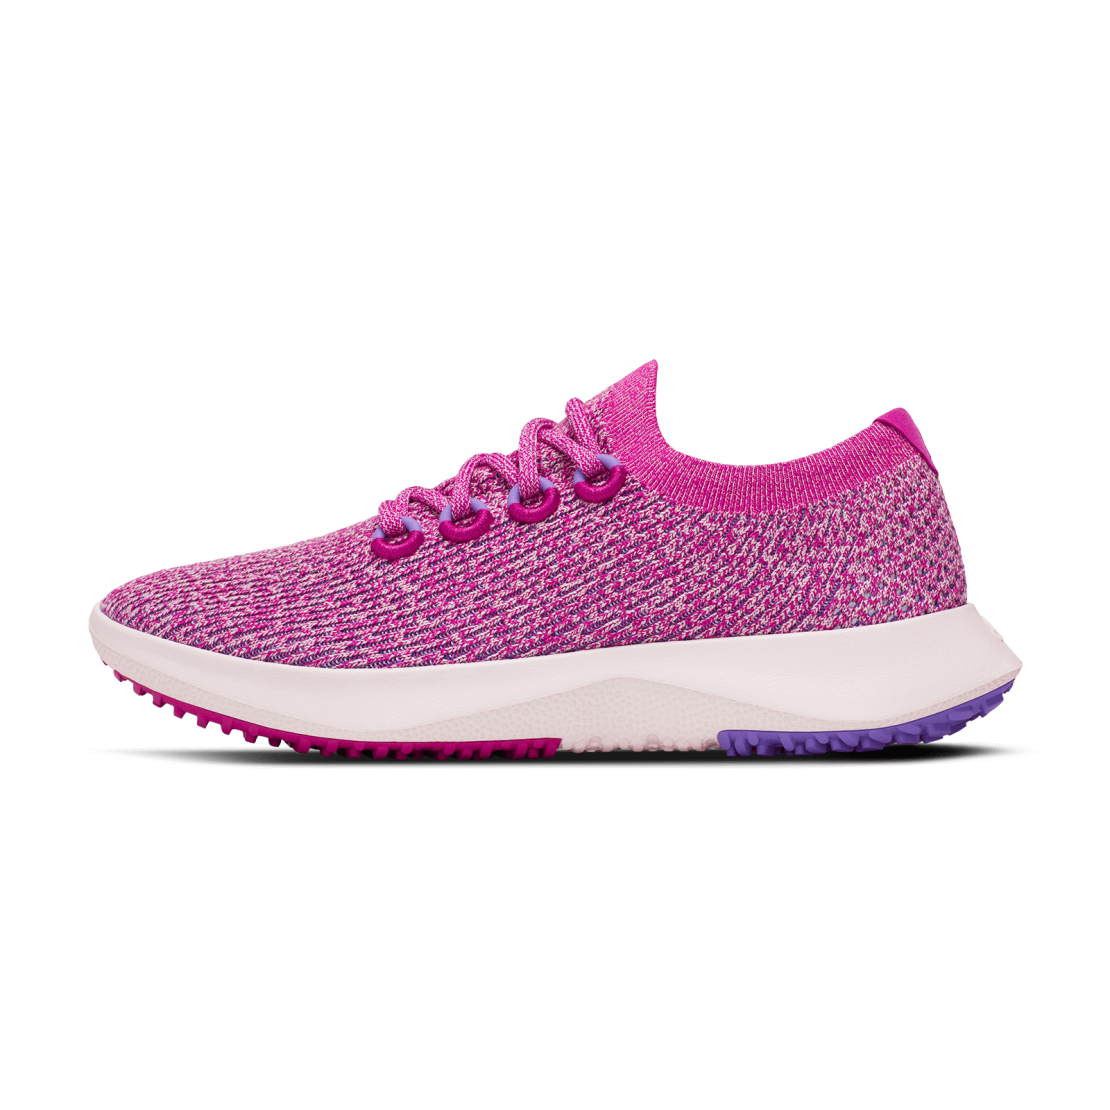 Women's Tree Dasher 2 - Bloom Pink (Calm Taupe Sole)